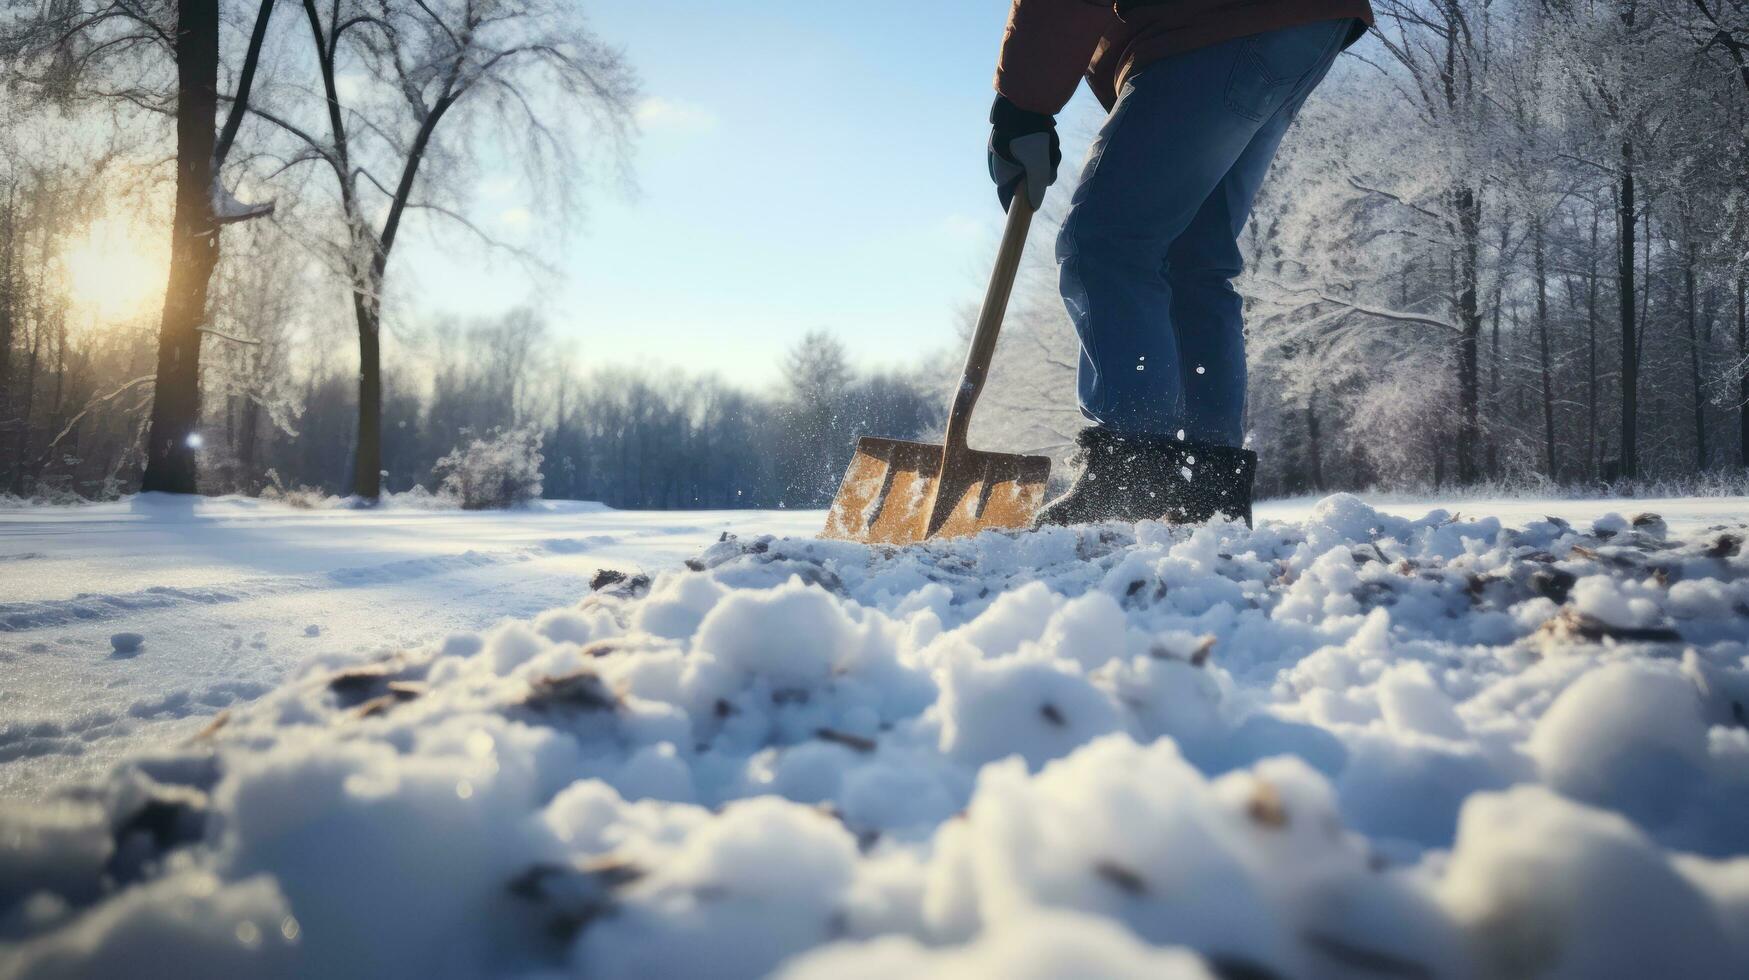 a person using a snow shovel to clear snow photo